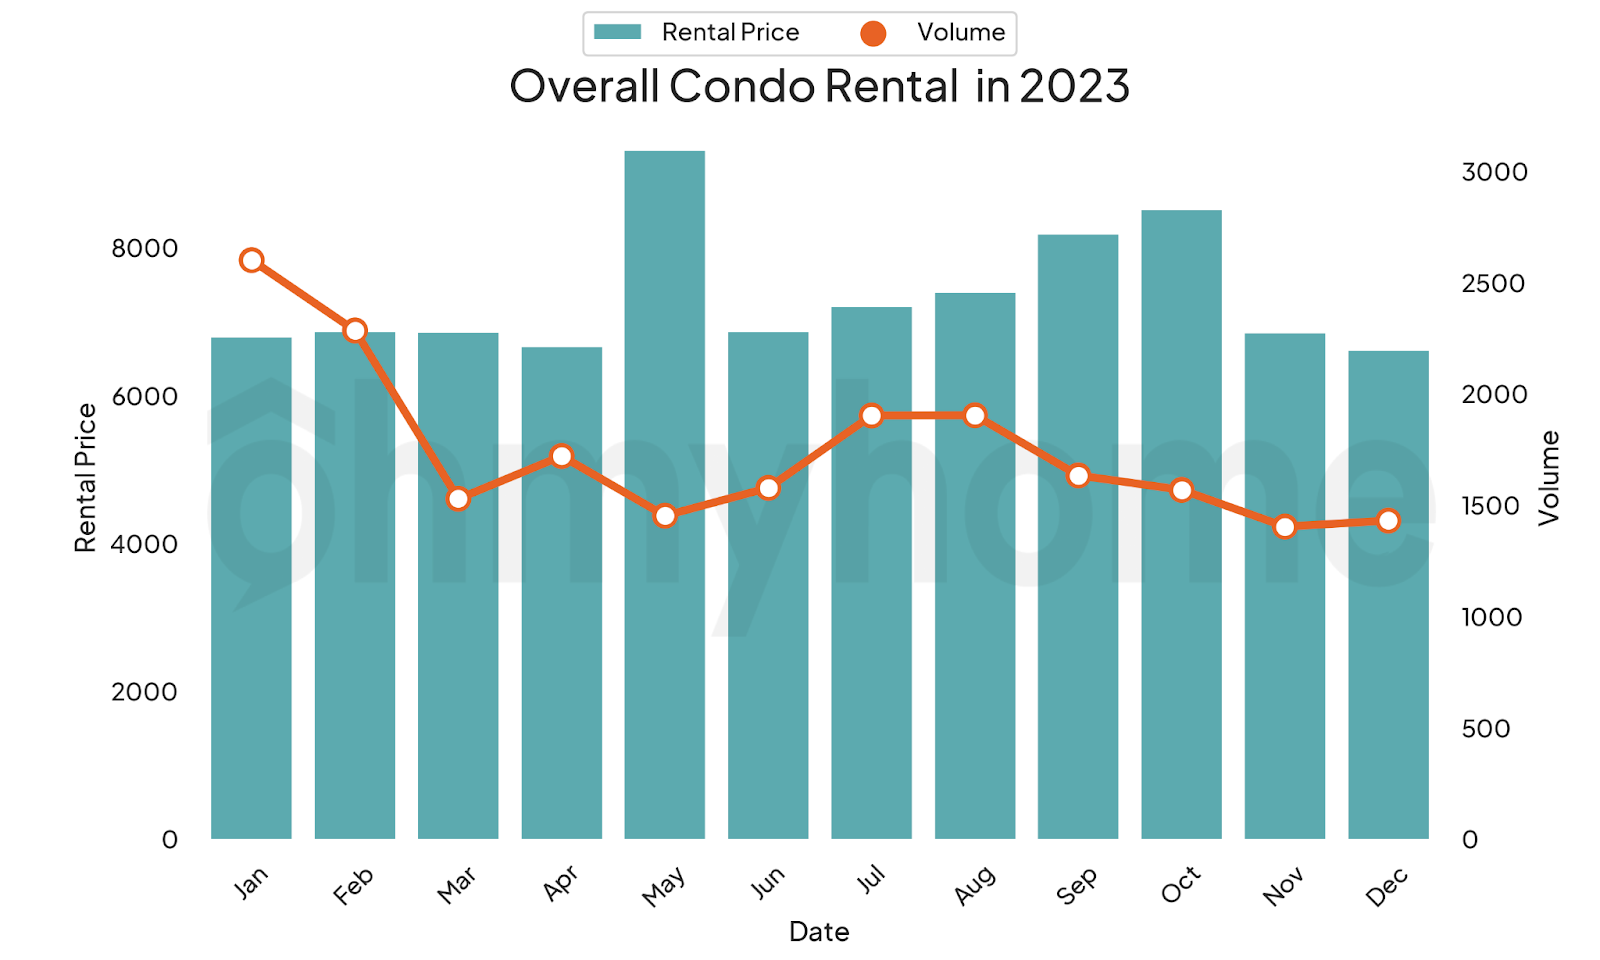 A bar and line chart showing the rental transaction volume and rental price movement of condos in Singapore in 2023